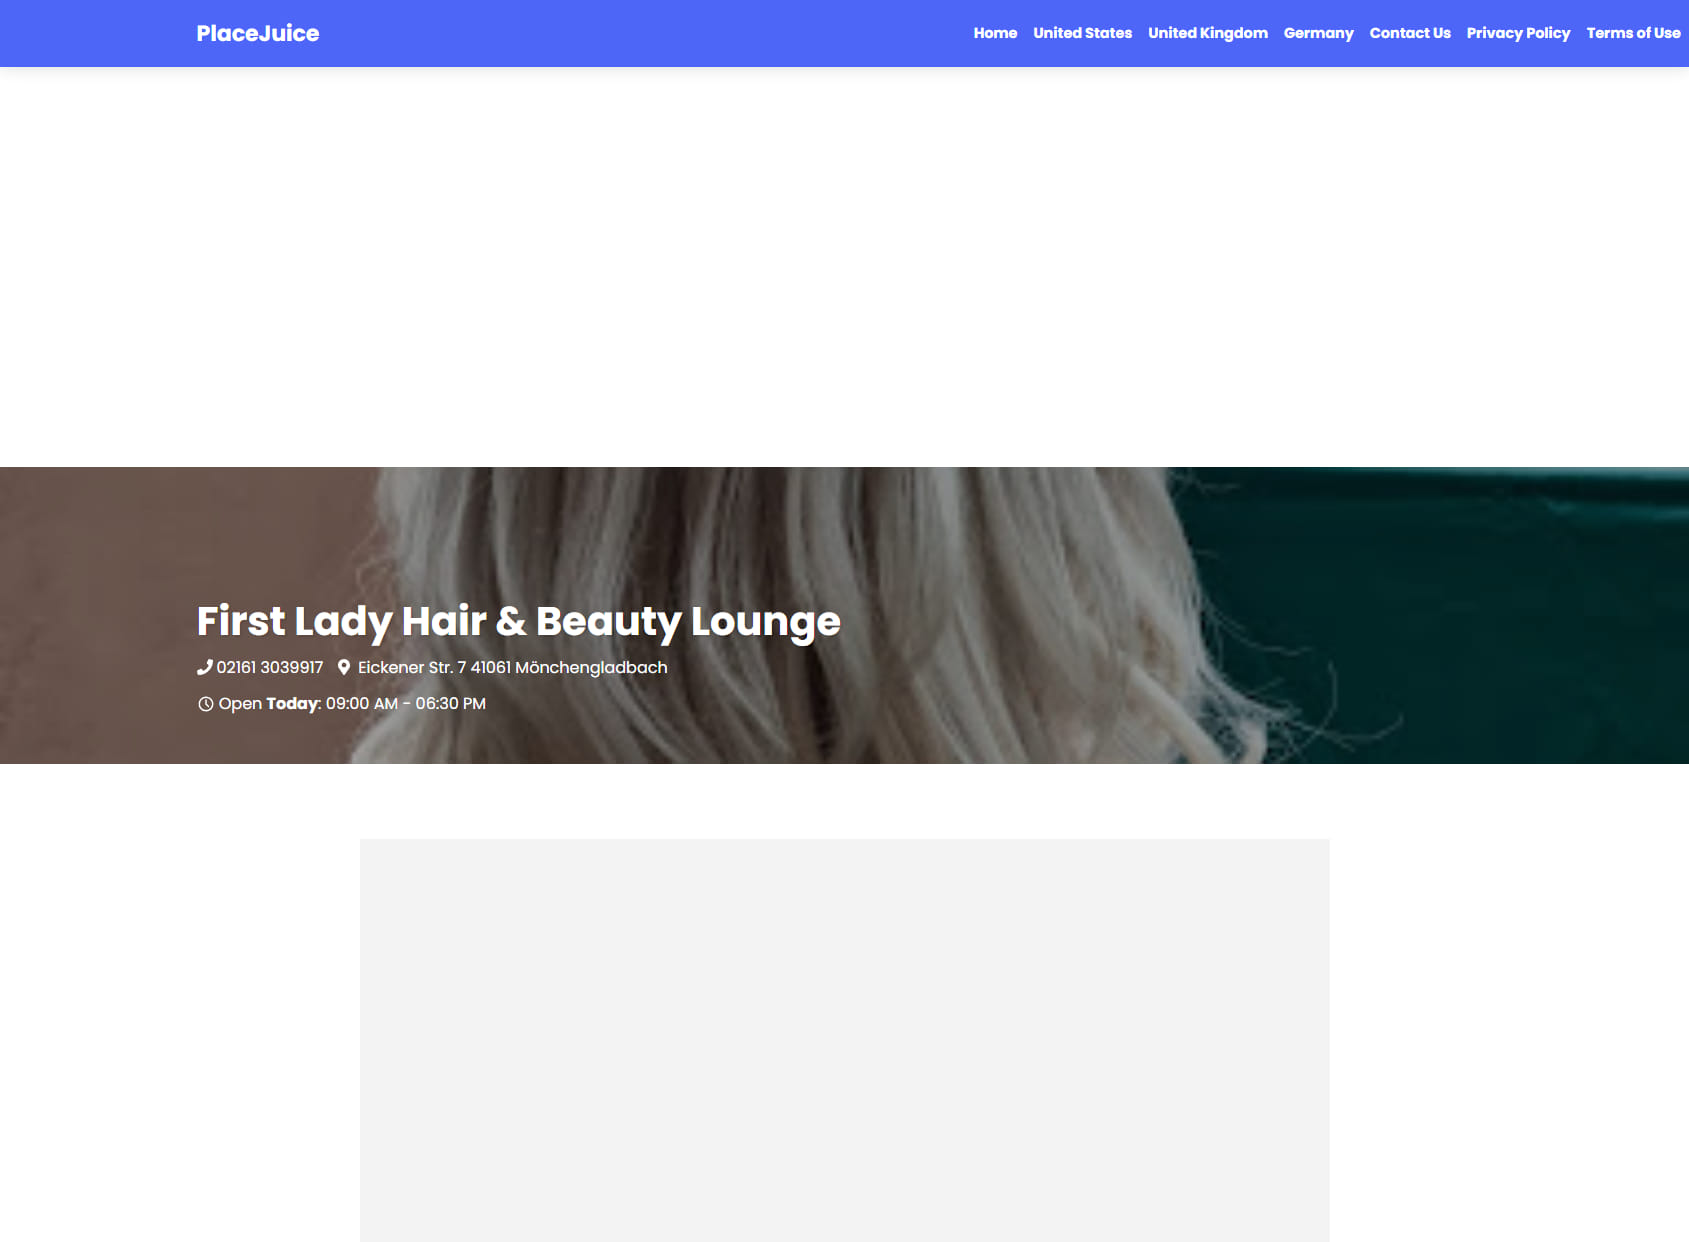 First Lady Hair & Beauty Lounge